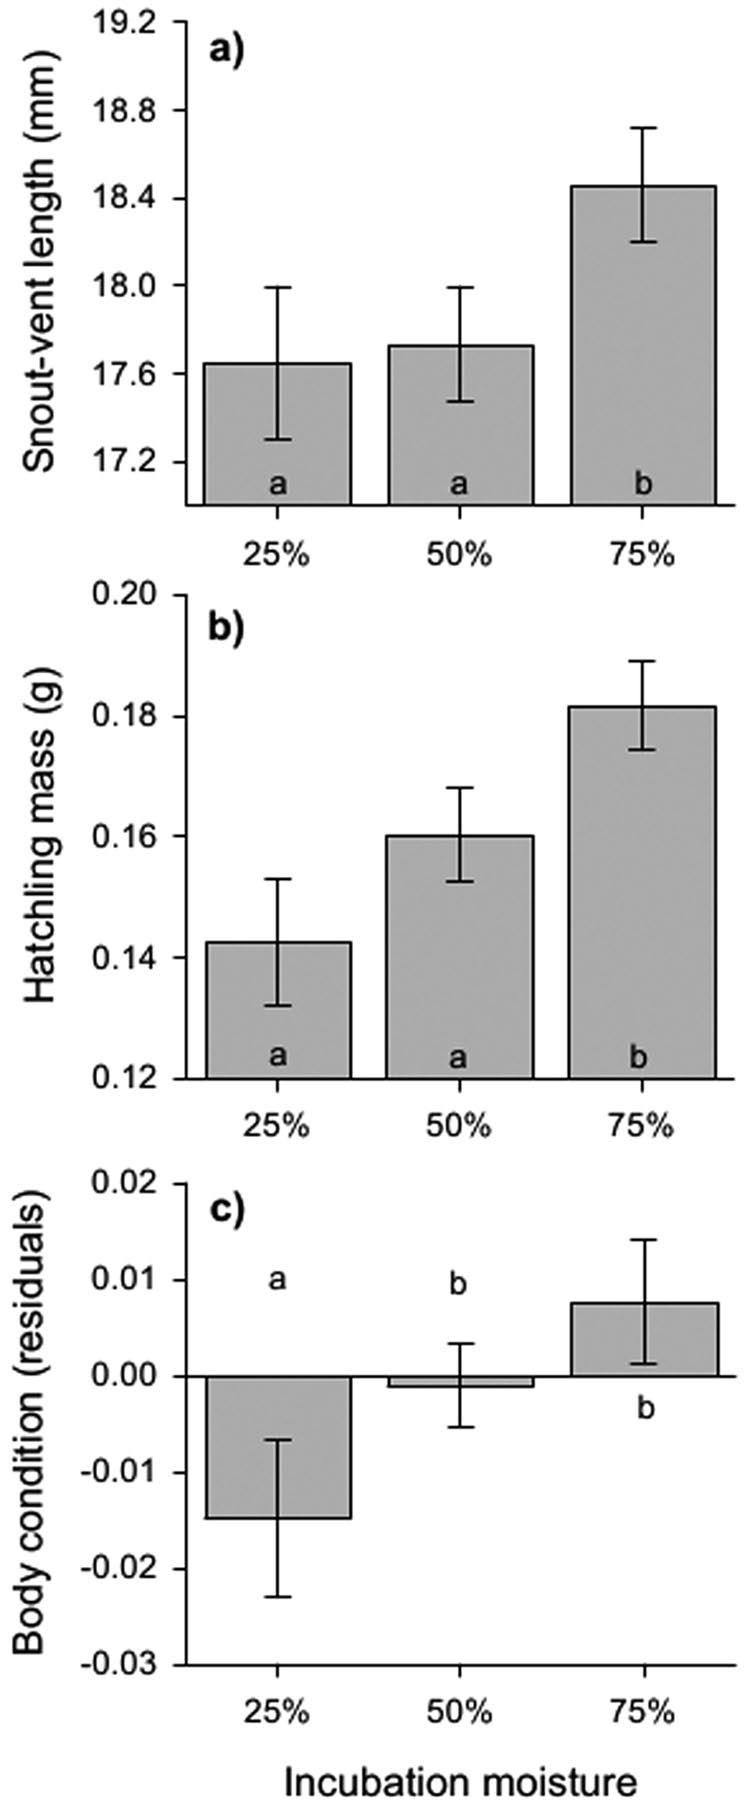 Reedy et al. Maternally chosen nest sites positively affect offspring fitness Page 5 of 8 Figure 3 Effect of egg incubation moisture on hatchling (a) SVL, (b) body mass, and (c) body condition.